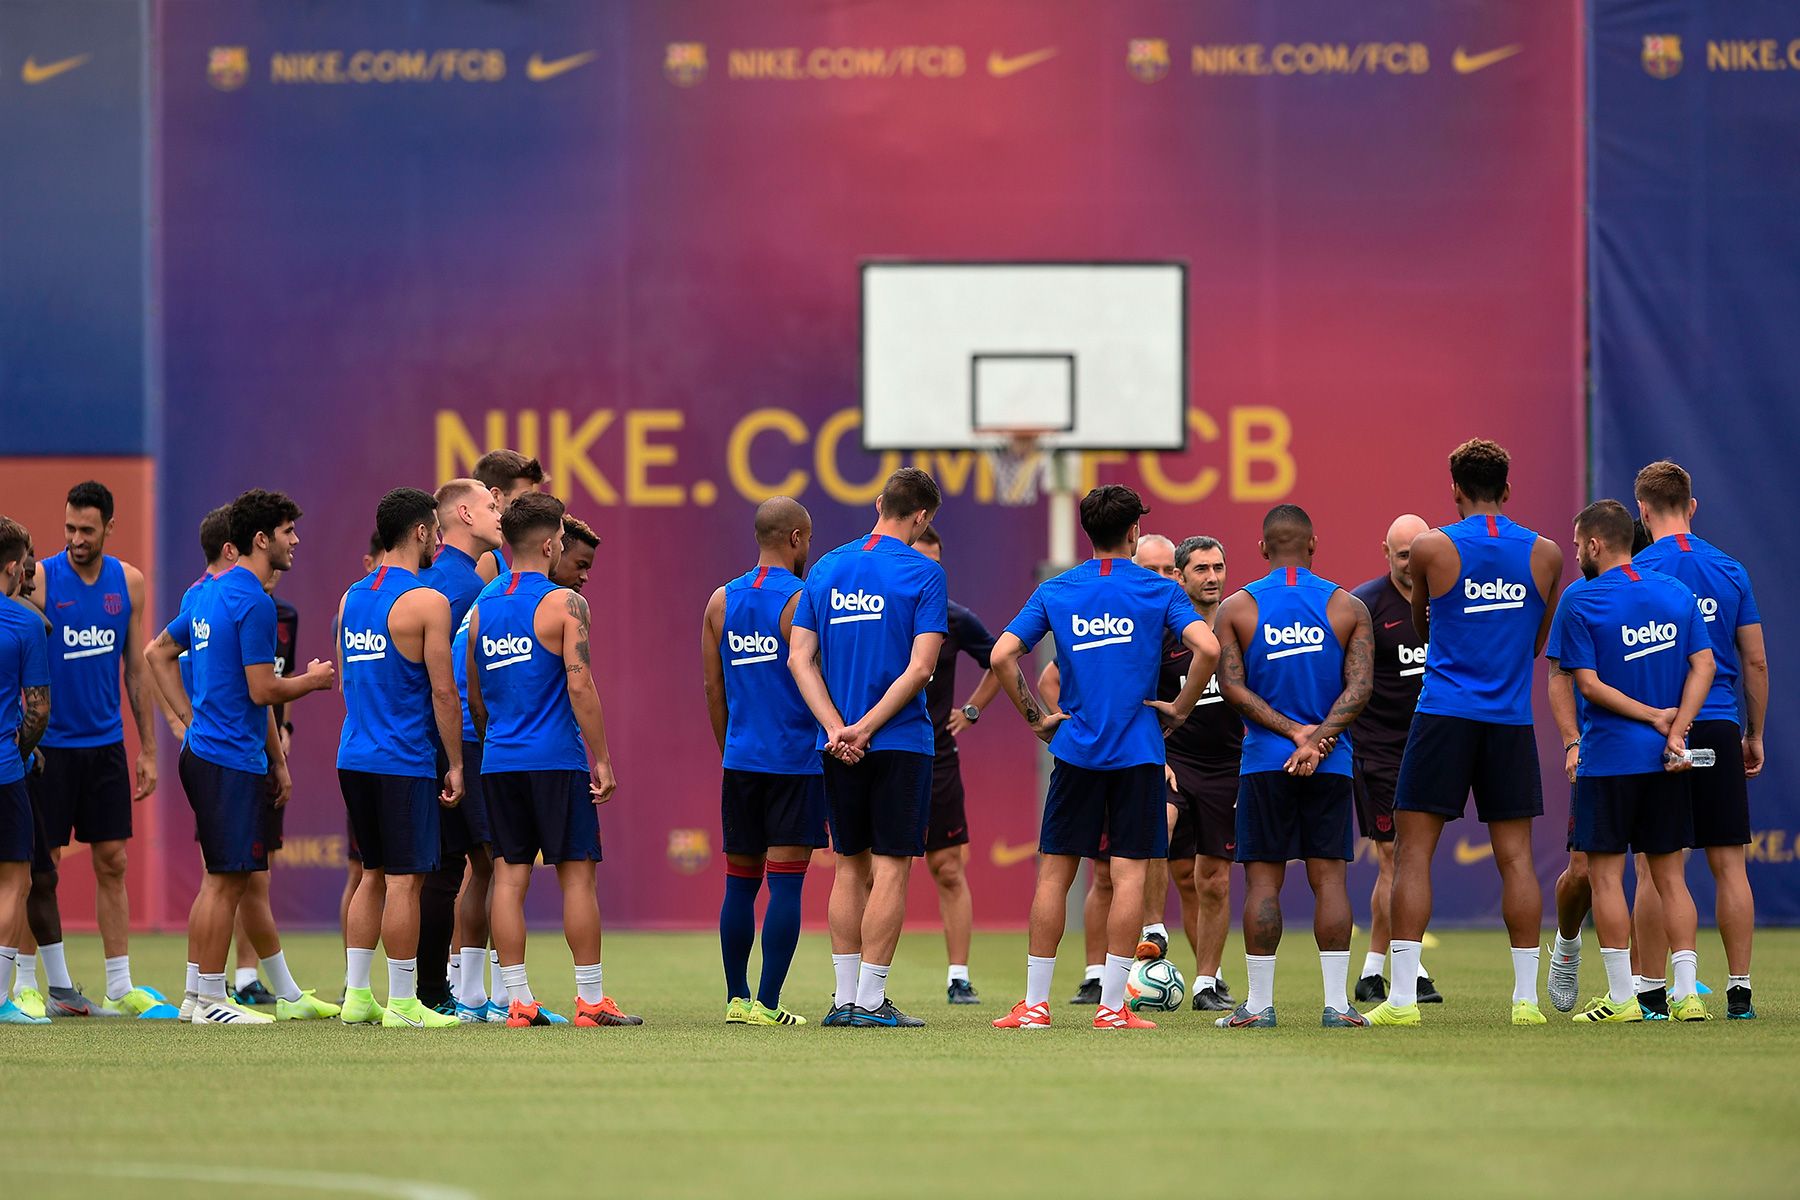 The players of FC Barcelona in a training